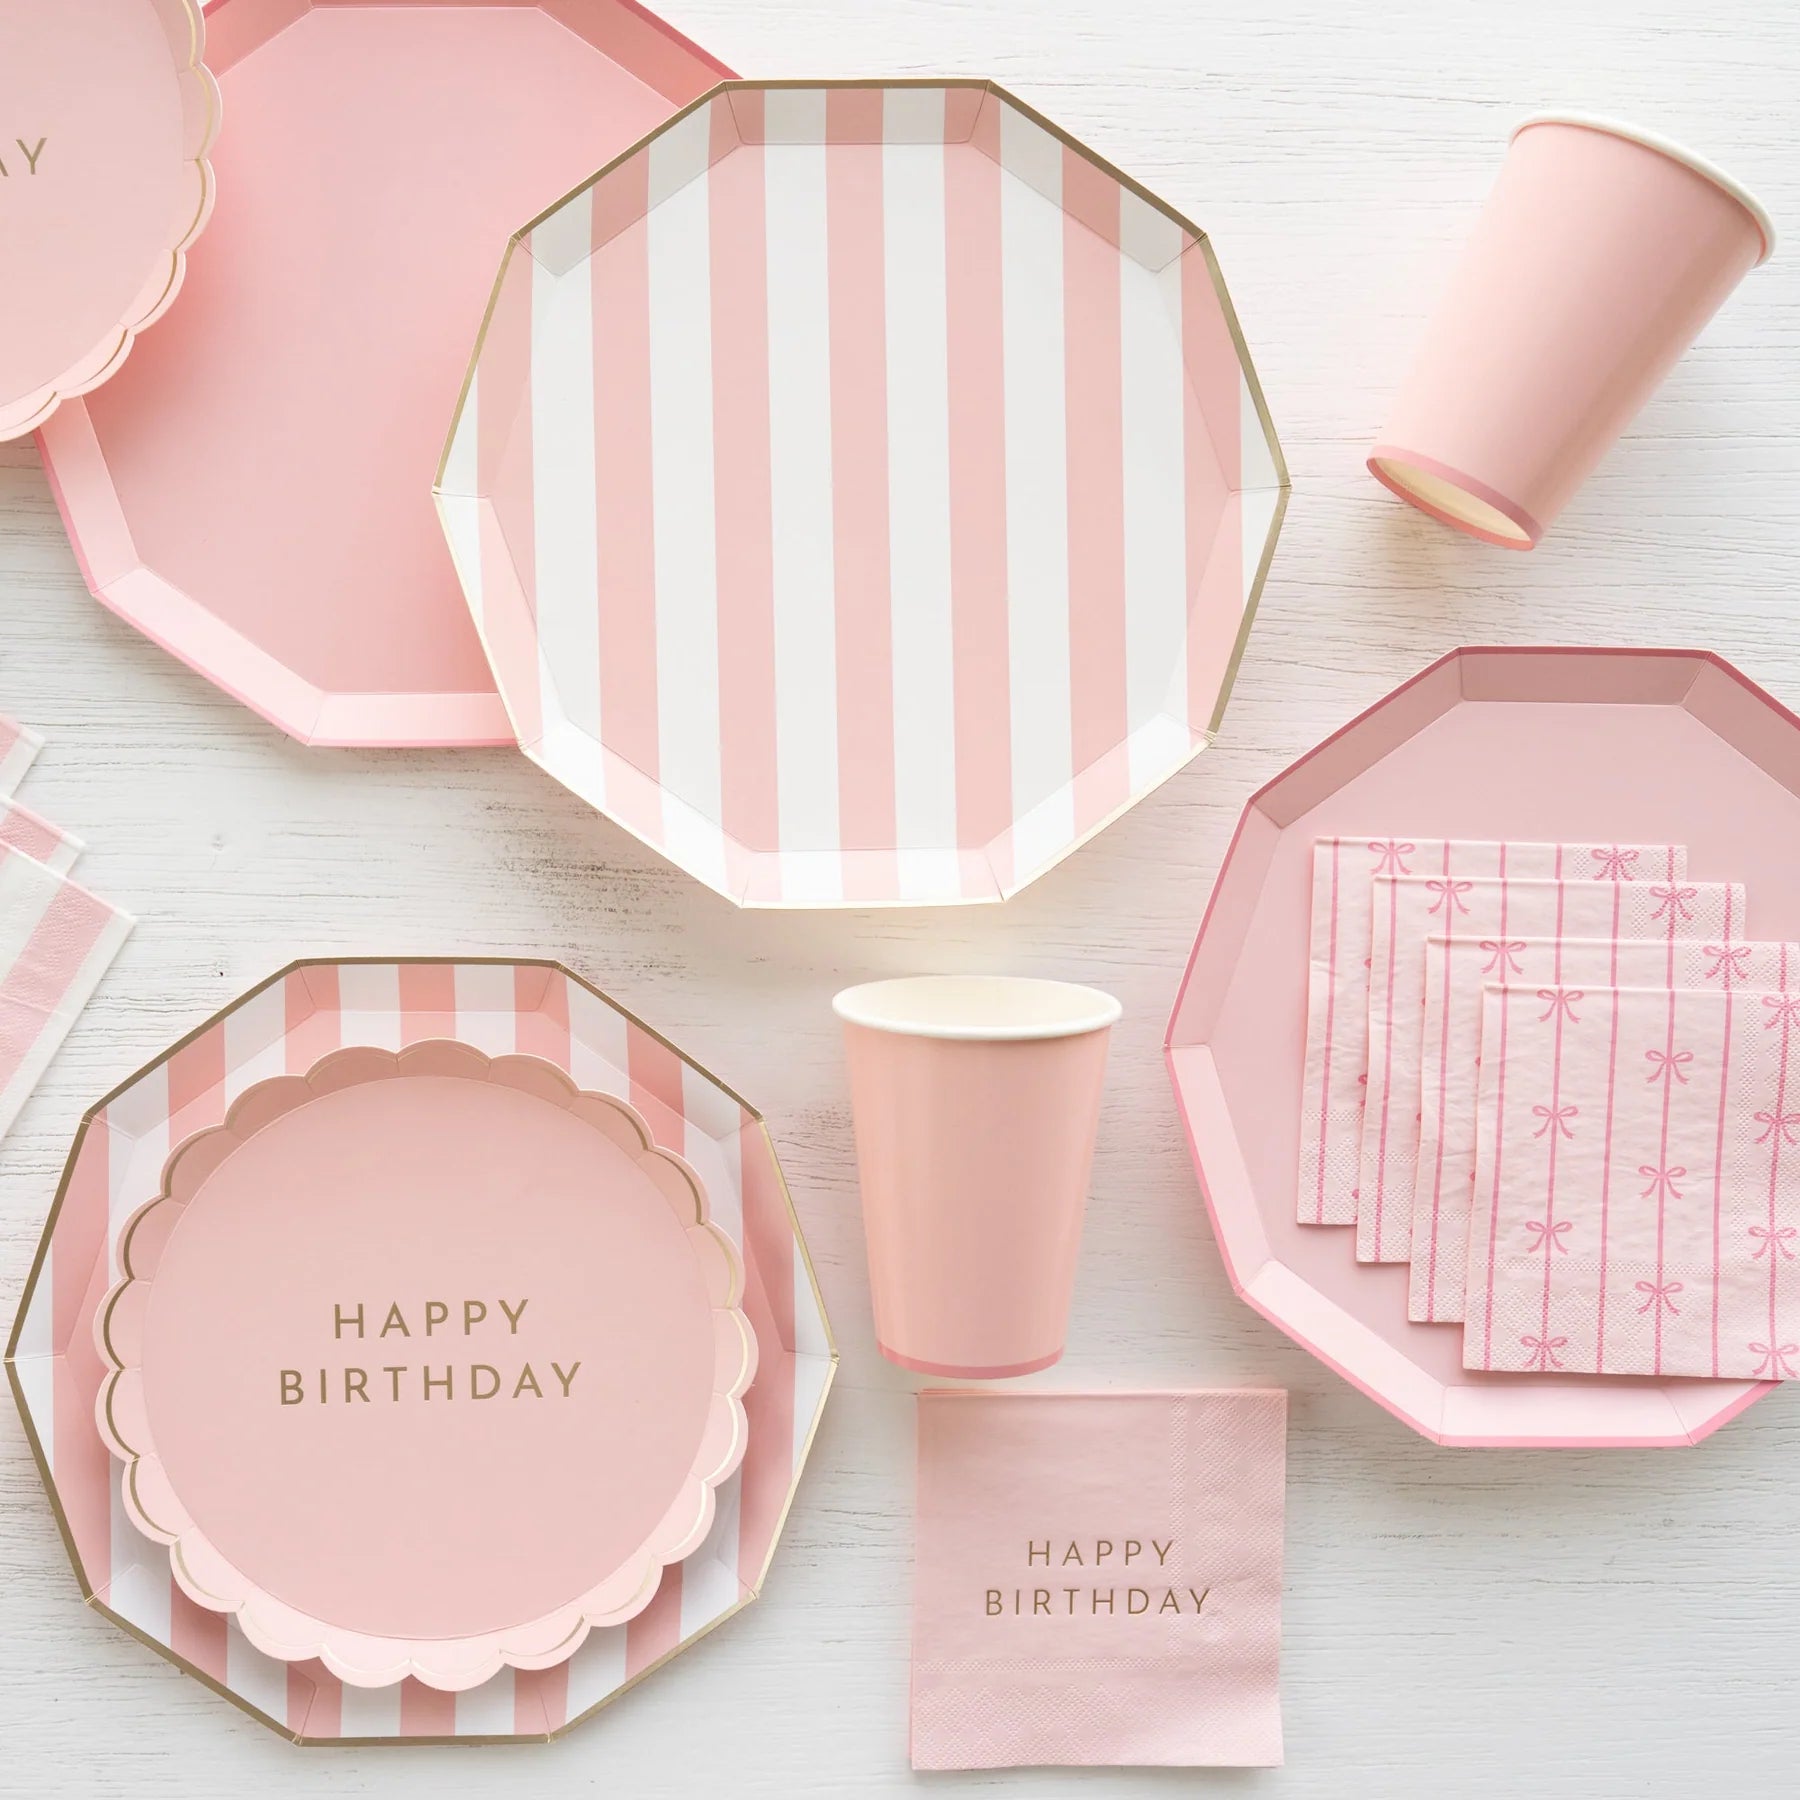 Light Pink Cabana Striped Dinner Plates 8ct | The Party Darling